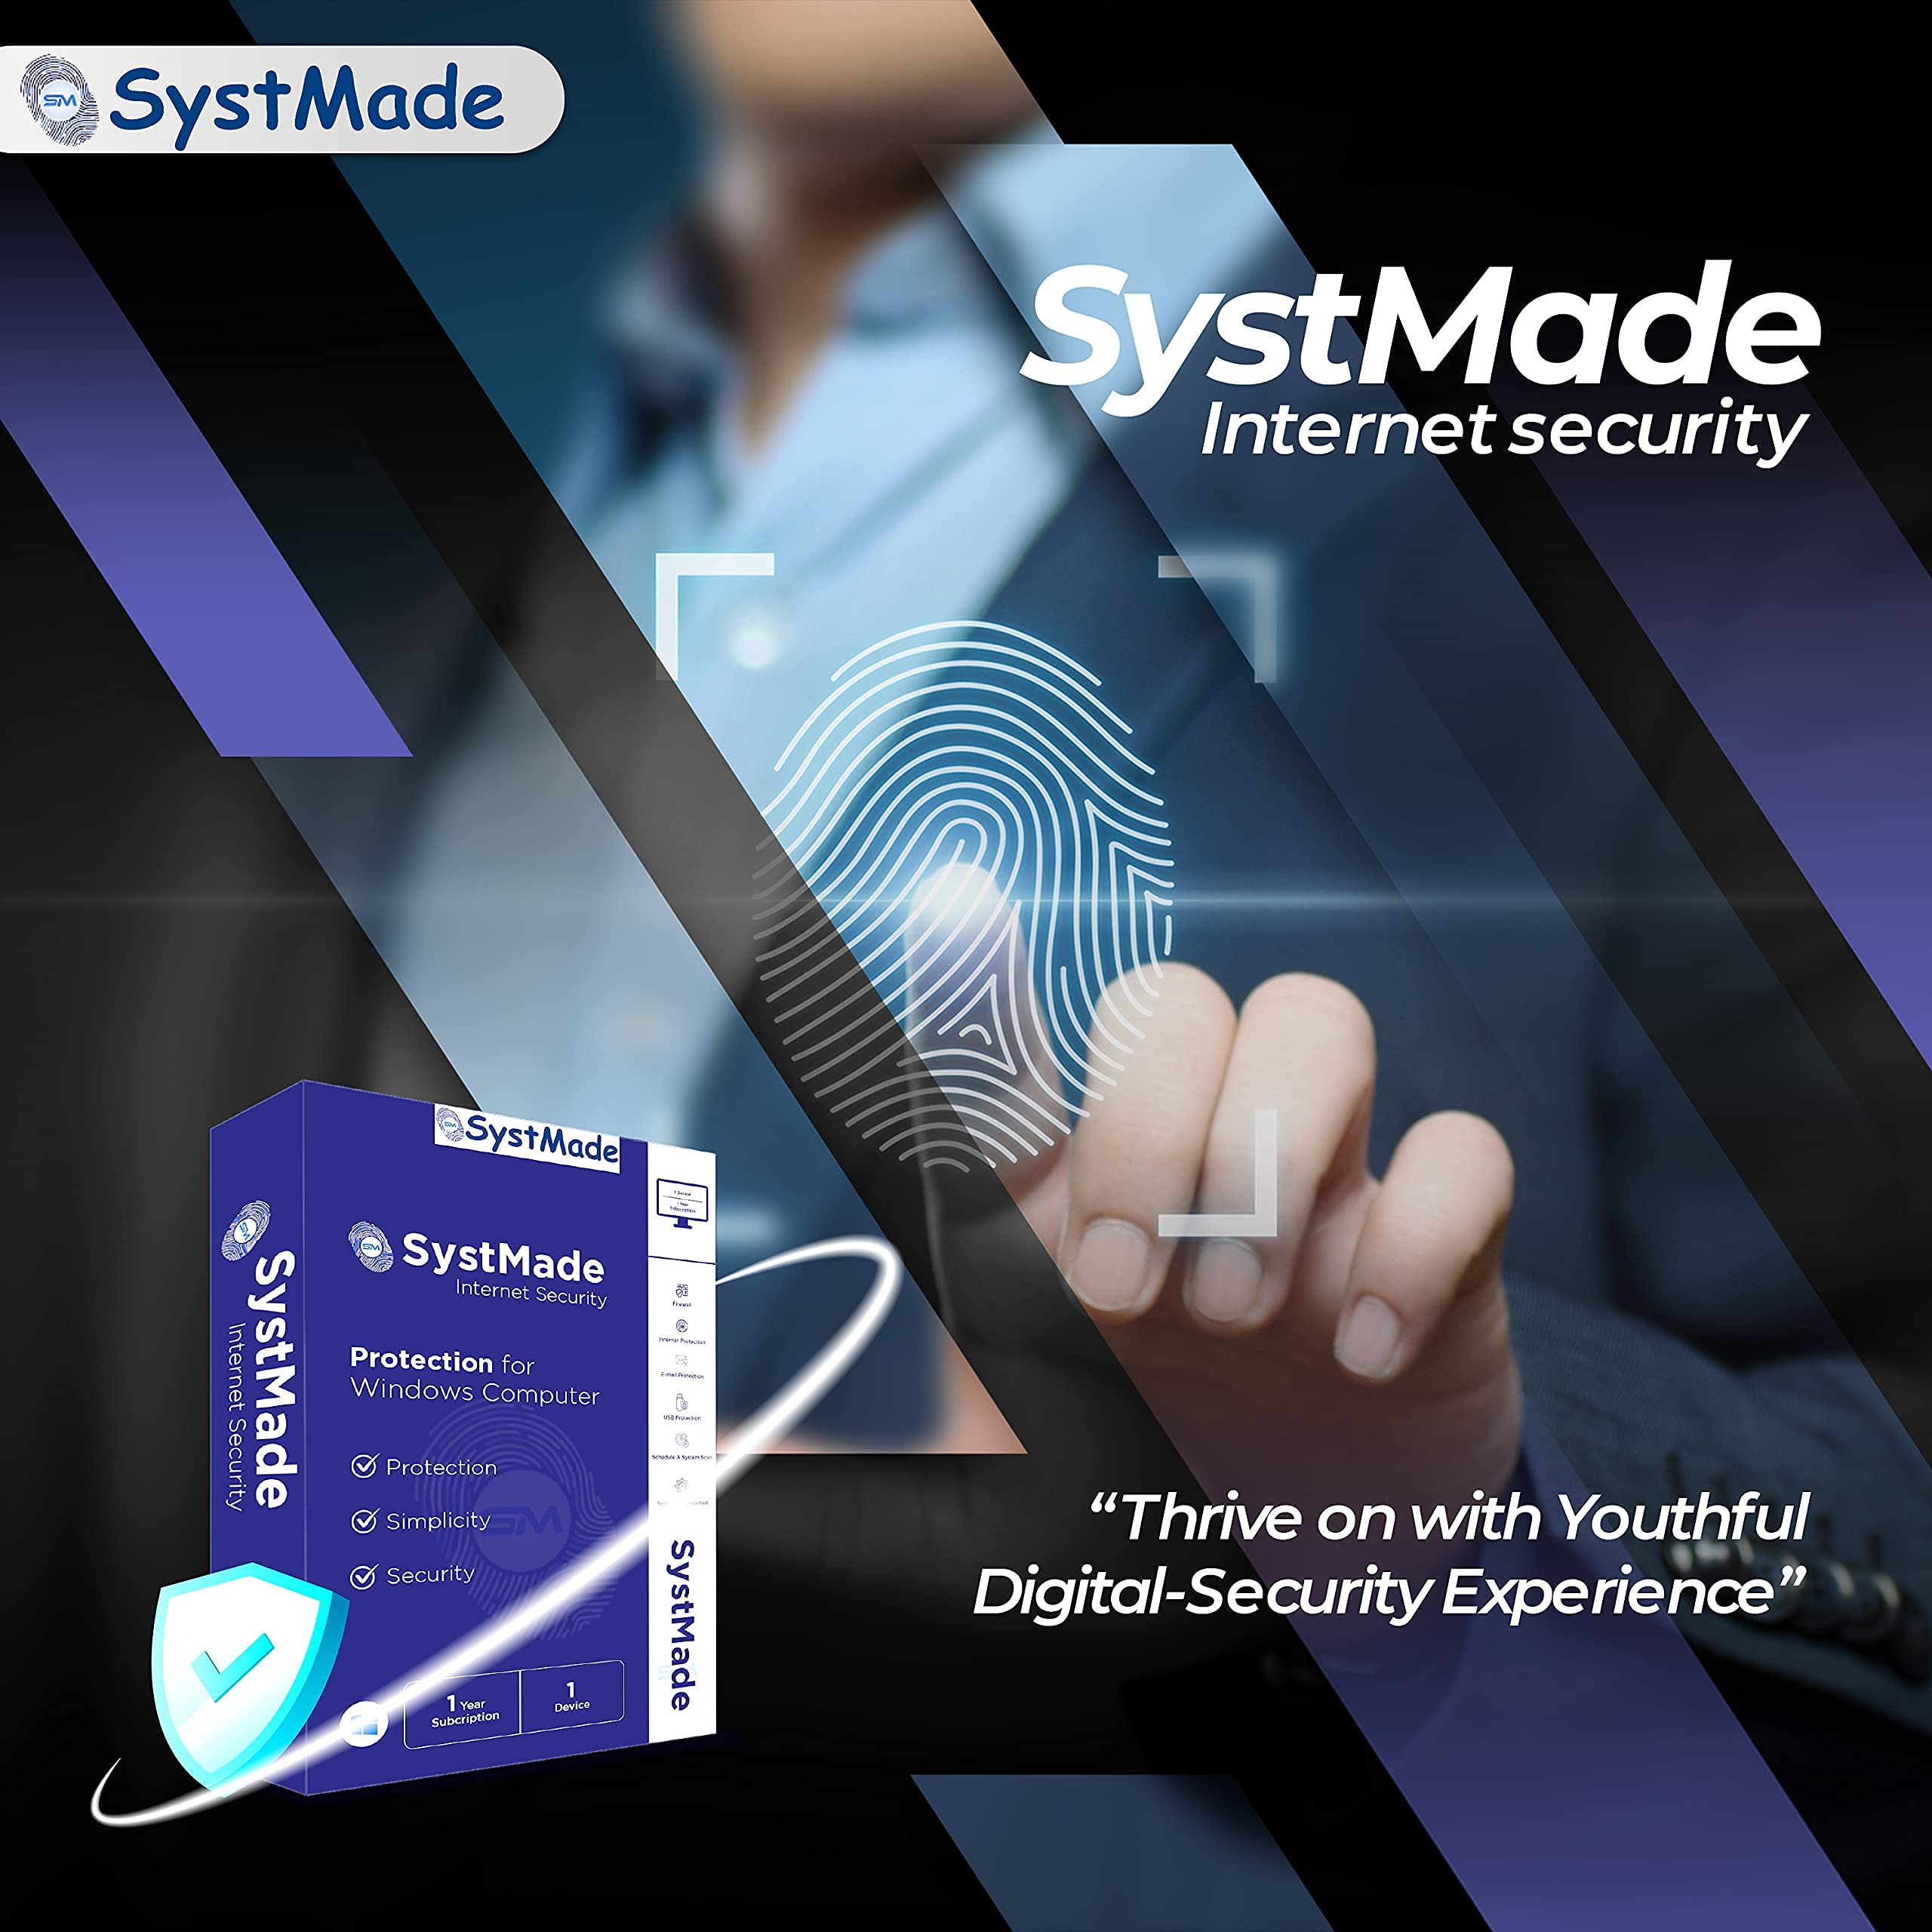 SystMade Internet Security I 1 PC 1 Year I Protection for Windows Computer I With Firewall Protection I Game Mode I Email Delivery in 2 Hours - No CD